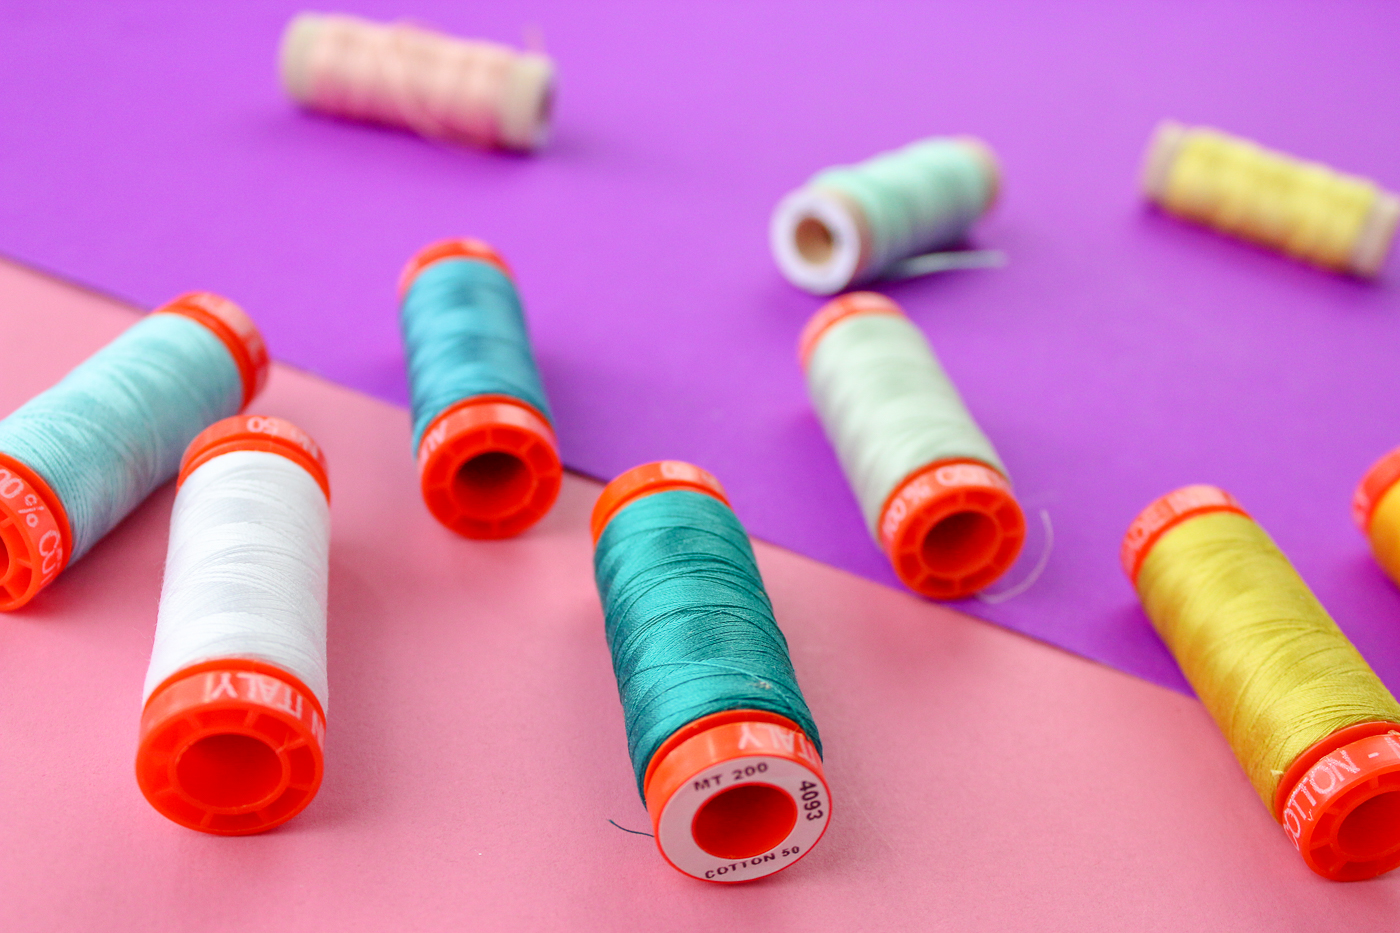 Pictured: varying colors of thread on spools. On a pink and purple background.